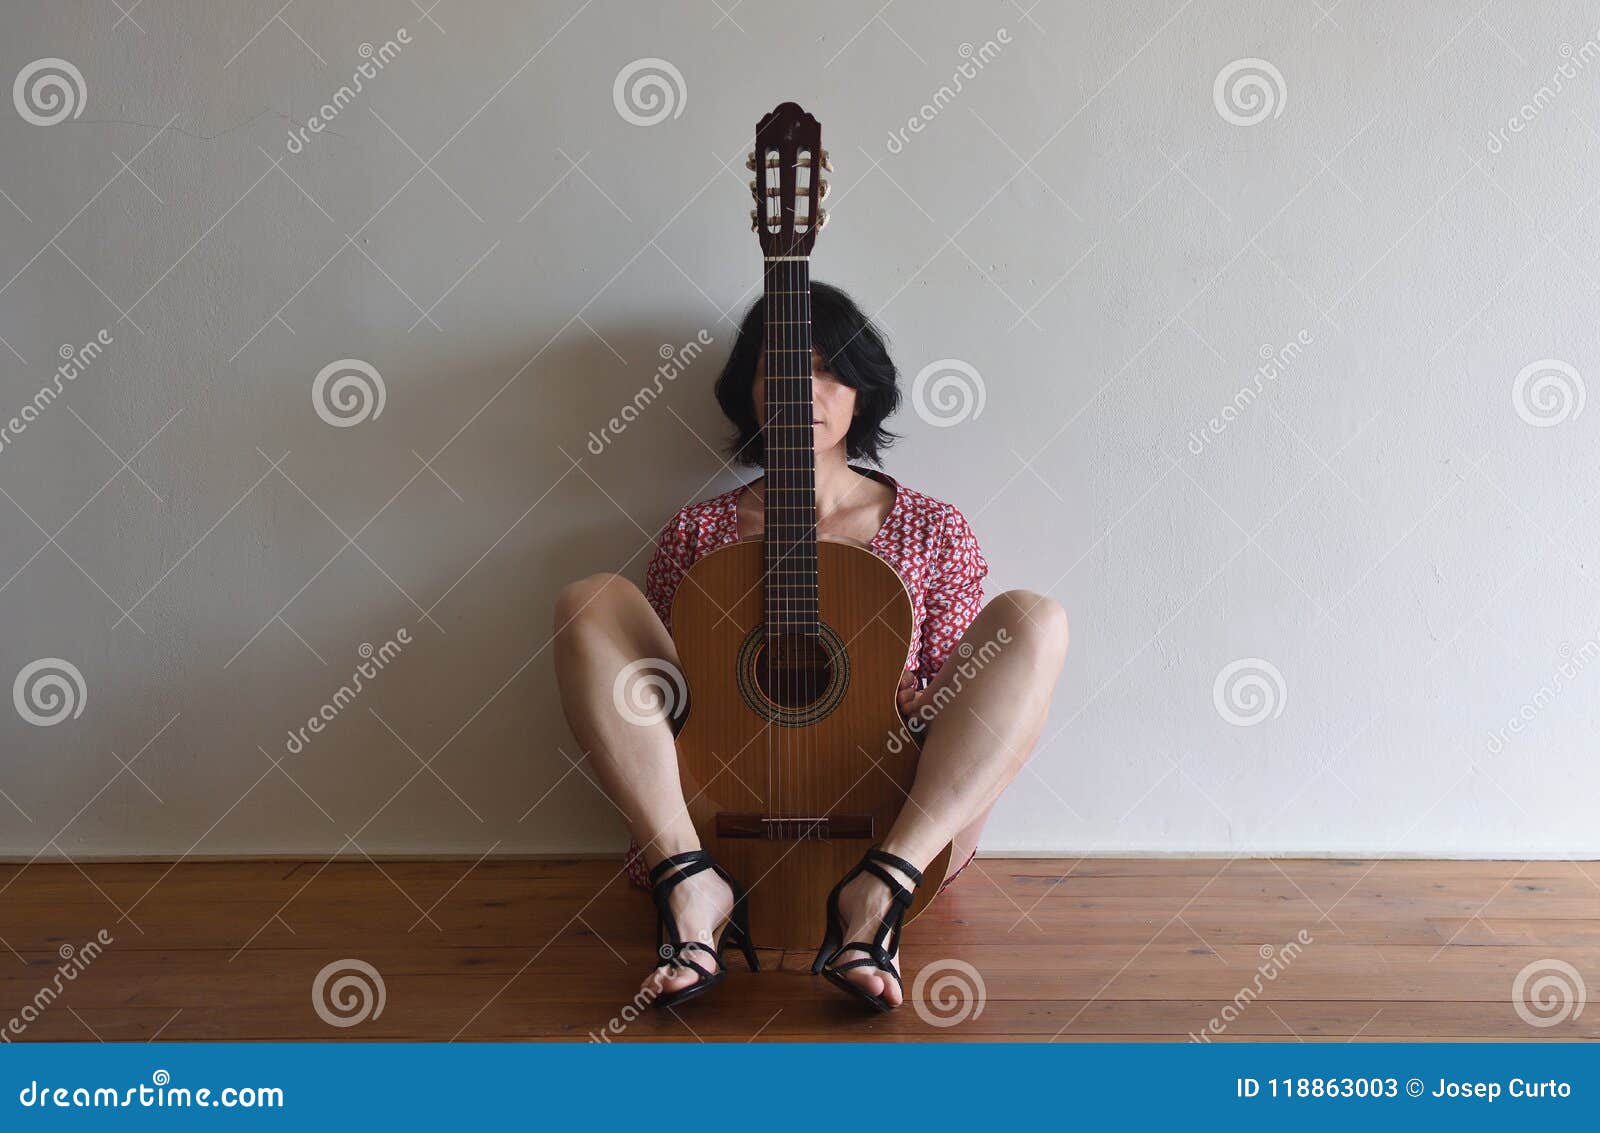 woman sitting with a guitar